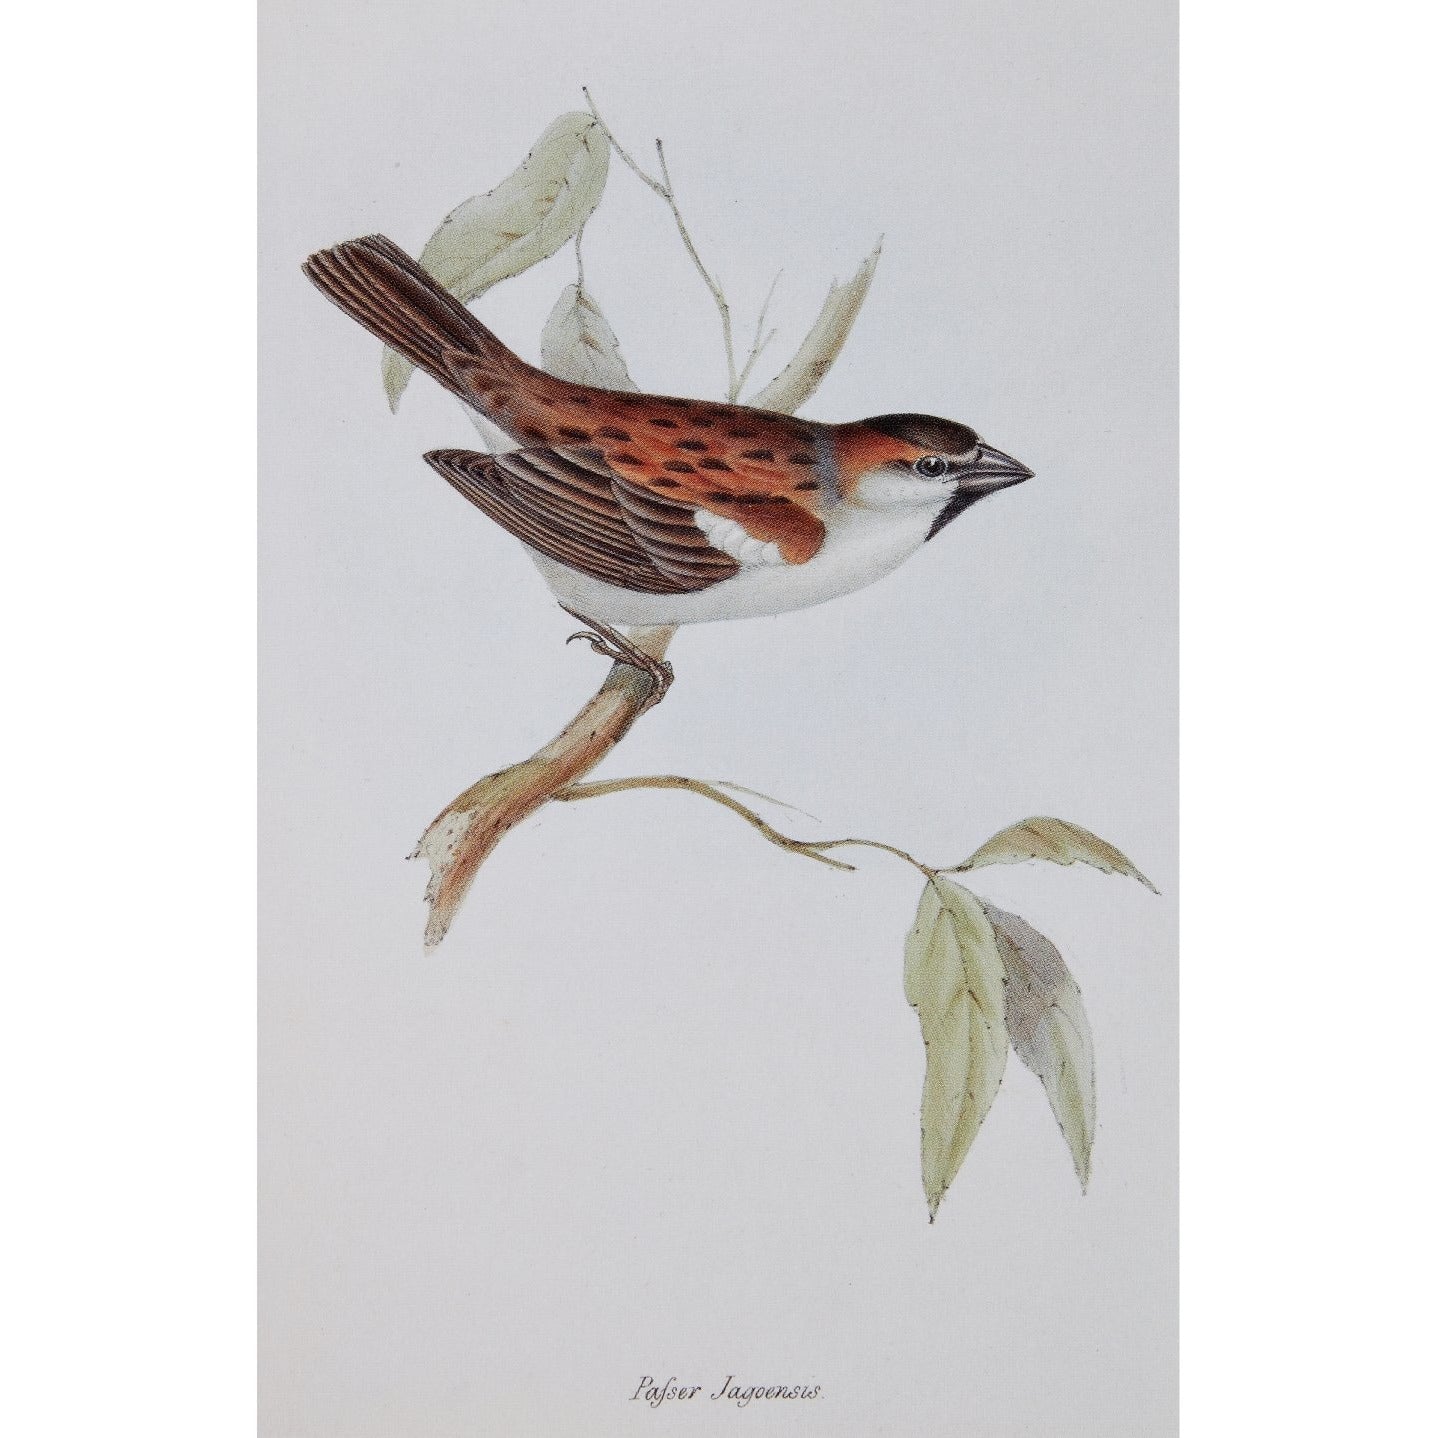 Notecard - Passer jagoensis finch. From the collection of Cambridge University Library, brought to you by CuratingCambridge.co.uk